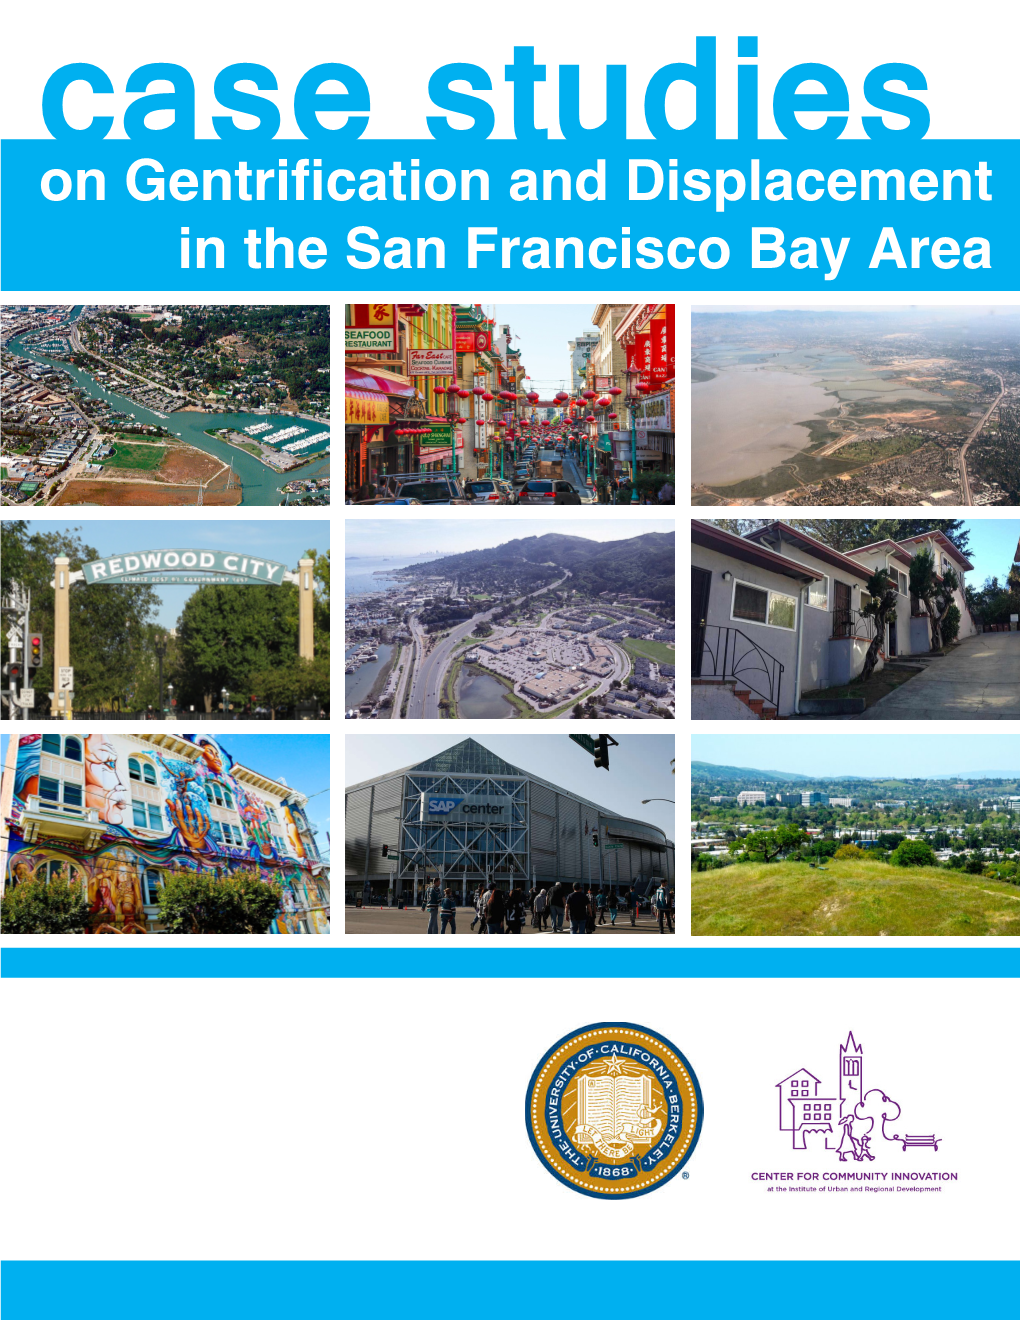 On Gentrification and Displacement in the San Francisco Bay Area